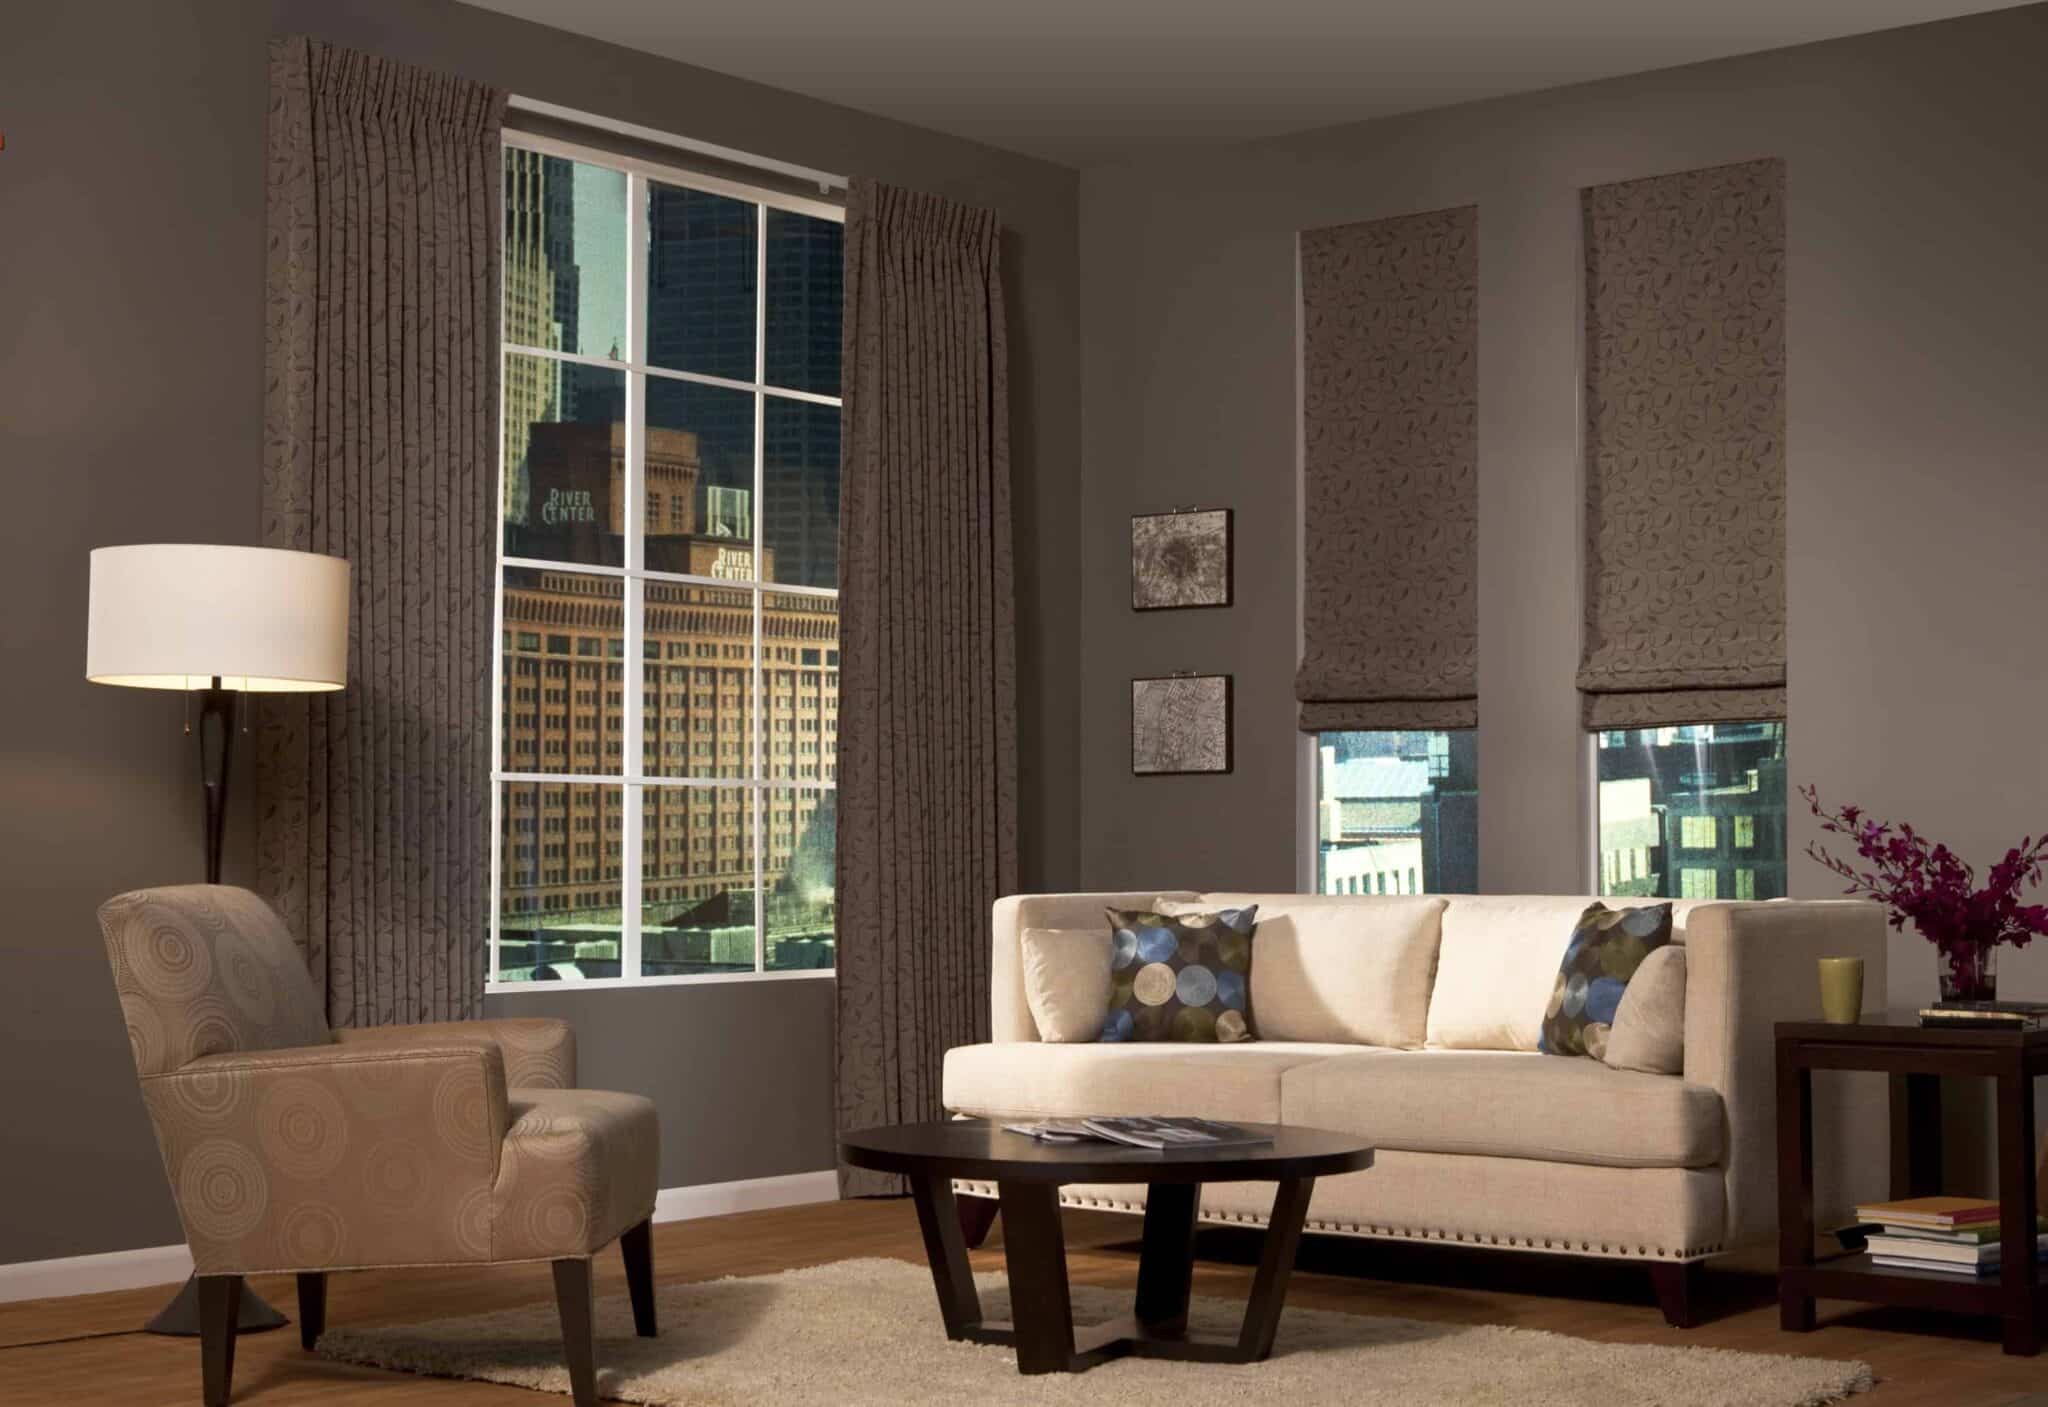 Miller's Window Works brings you premium solutions to find Roman shades near me